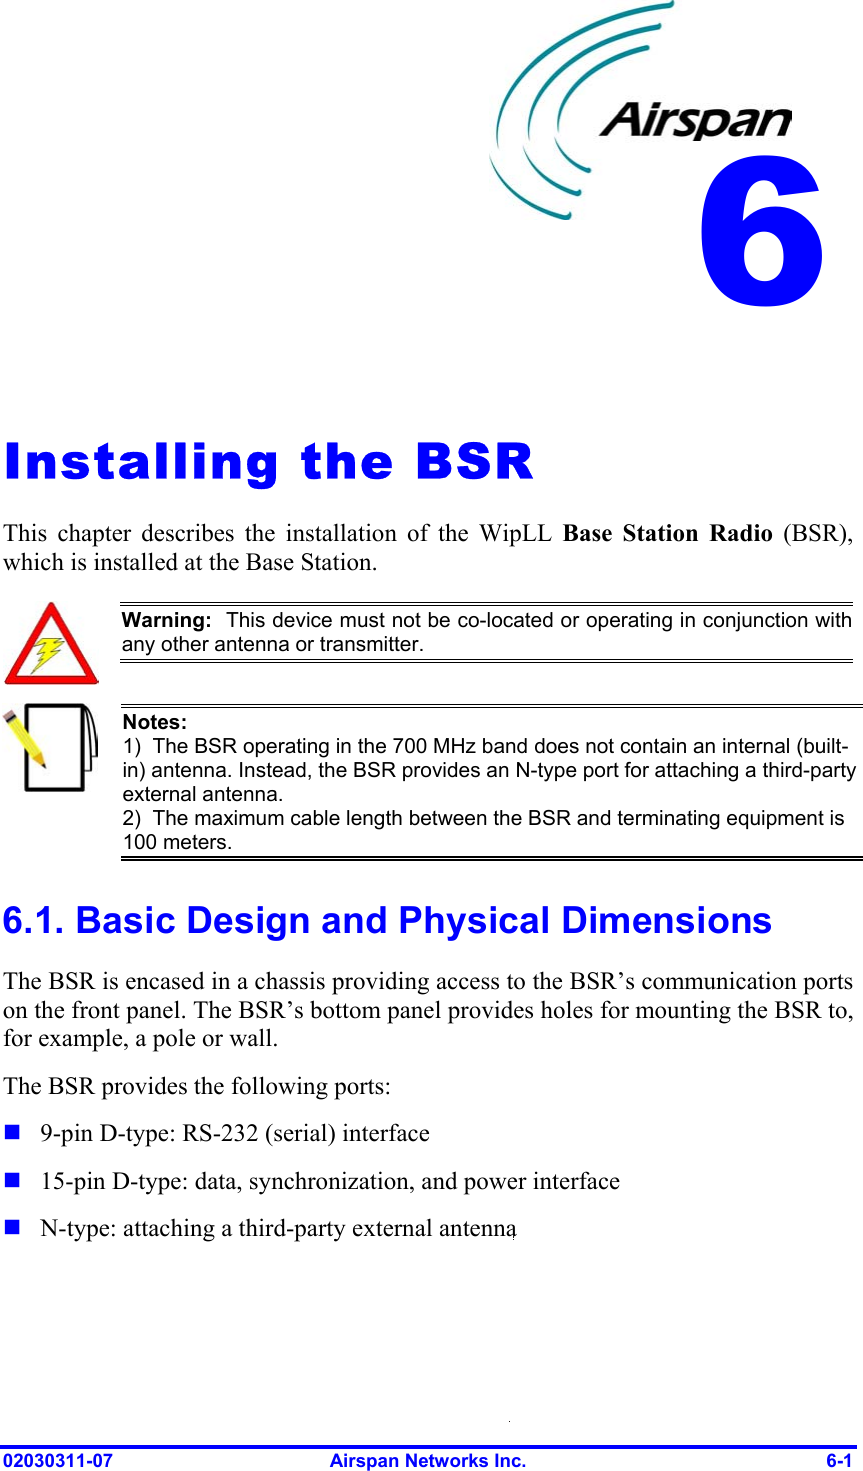  6   Installing the BSR This chapter describes the installation of the WipLL Base Station Radio (BSR), which is installed at the Base Station.  Warning:  This device must not be co-located or operating in conjunction with any other antenna or transmitter.  Notes:  1)  The BSR operating in the 700 MHz band does not contain an internal (built-in) antenna. Instead, the BSR provides an N-type port for attaching a third-party external antenna. 2)  The maximum cable length between the BSR and terminating equipment is 100 meters. 6.1. Basic Design and Physical Dimensions The BSR is encased in a chassis providing access to the BSR’s communication ports on the front panel. The BSR’s bottom panel provides holes for mounting the BSR to, for example, a pole or wall. The BSR provides the following ports:    9-pin D-type: RS-232 (serial) interface 15-pin D-type: data, synchronization, and power interface N-type: attaching a third-party external antenna 02030311-07  Airspan Networks Inc.  6-1 